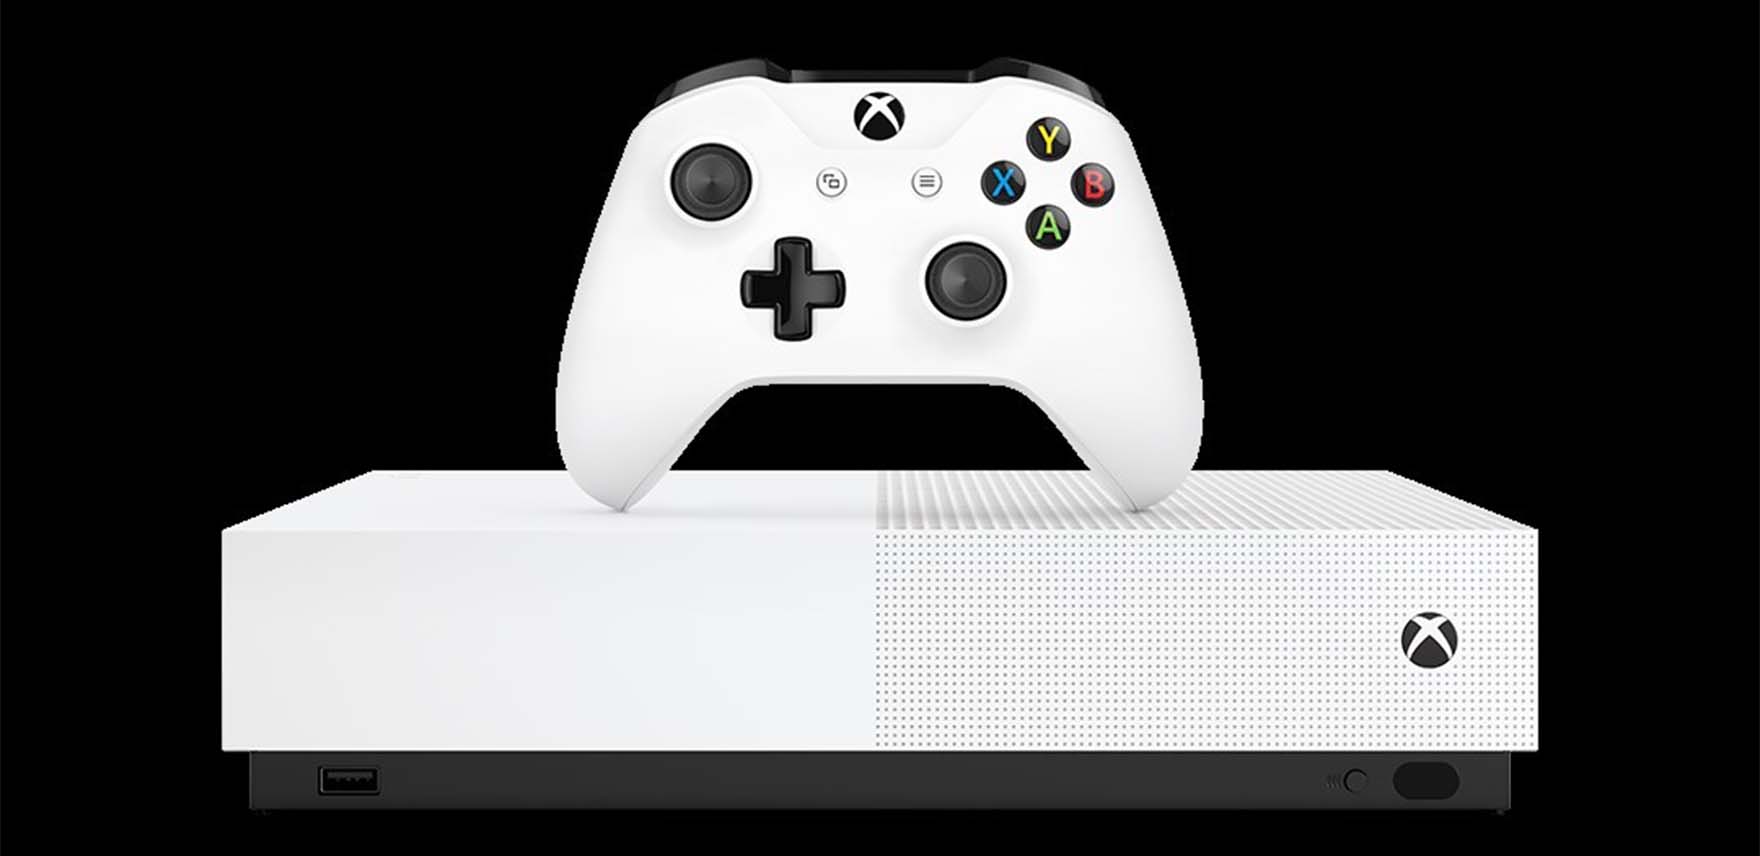 Xbox One S All-Digital Edition console and controller in white